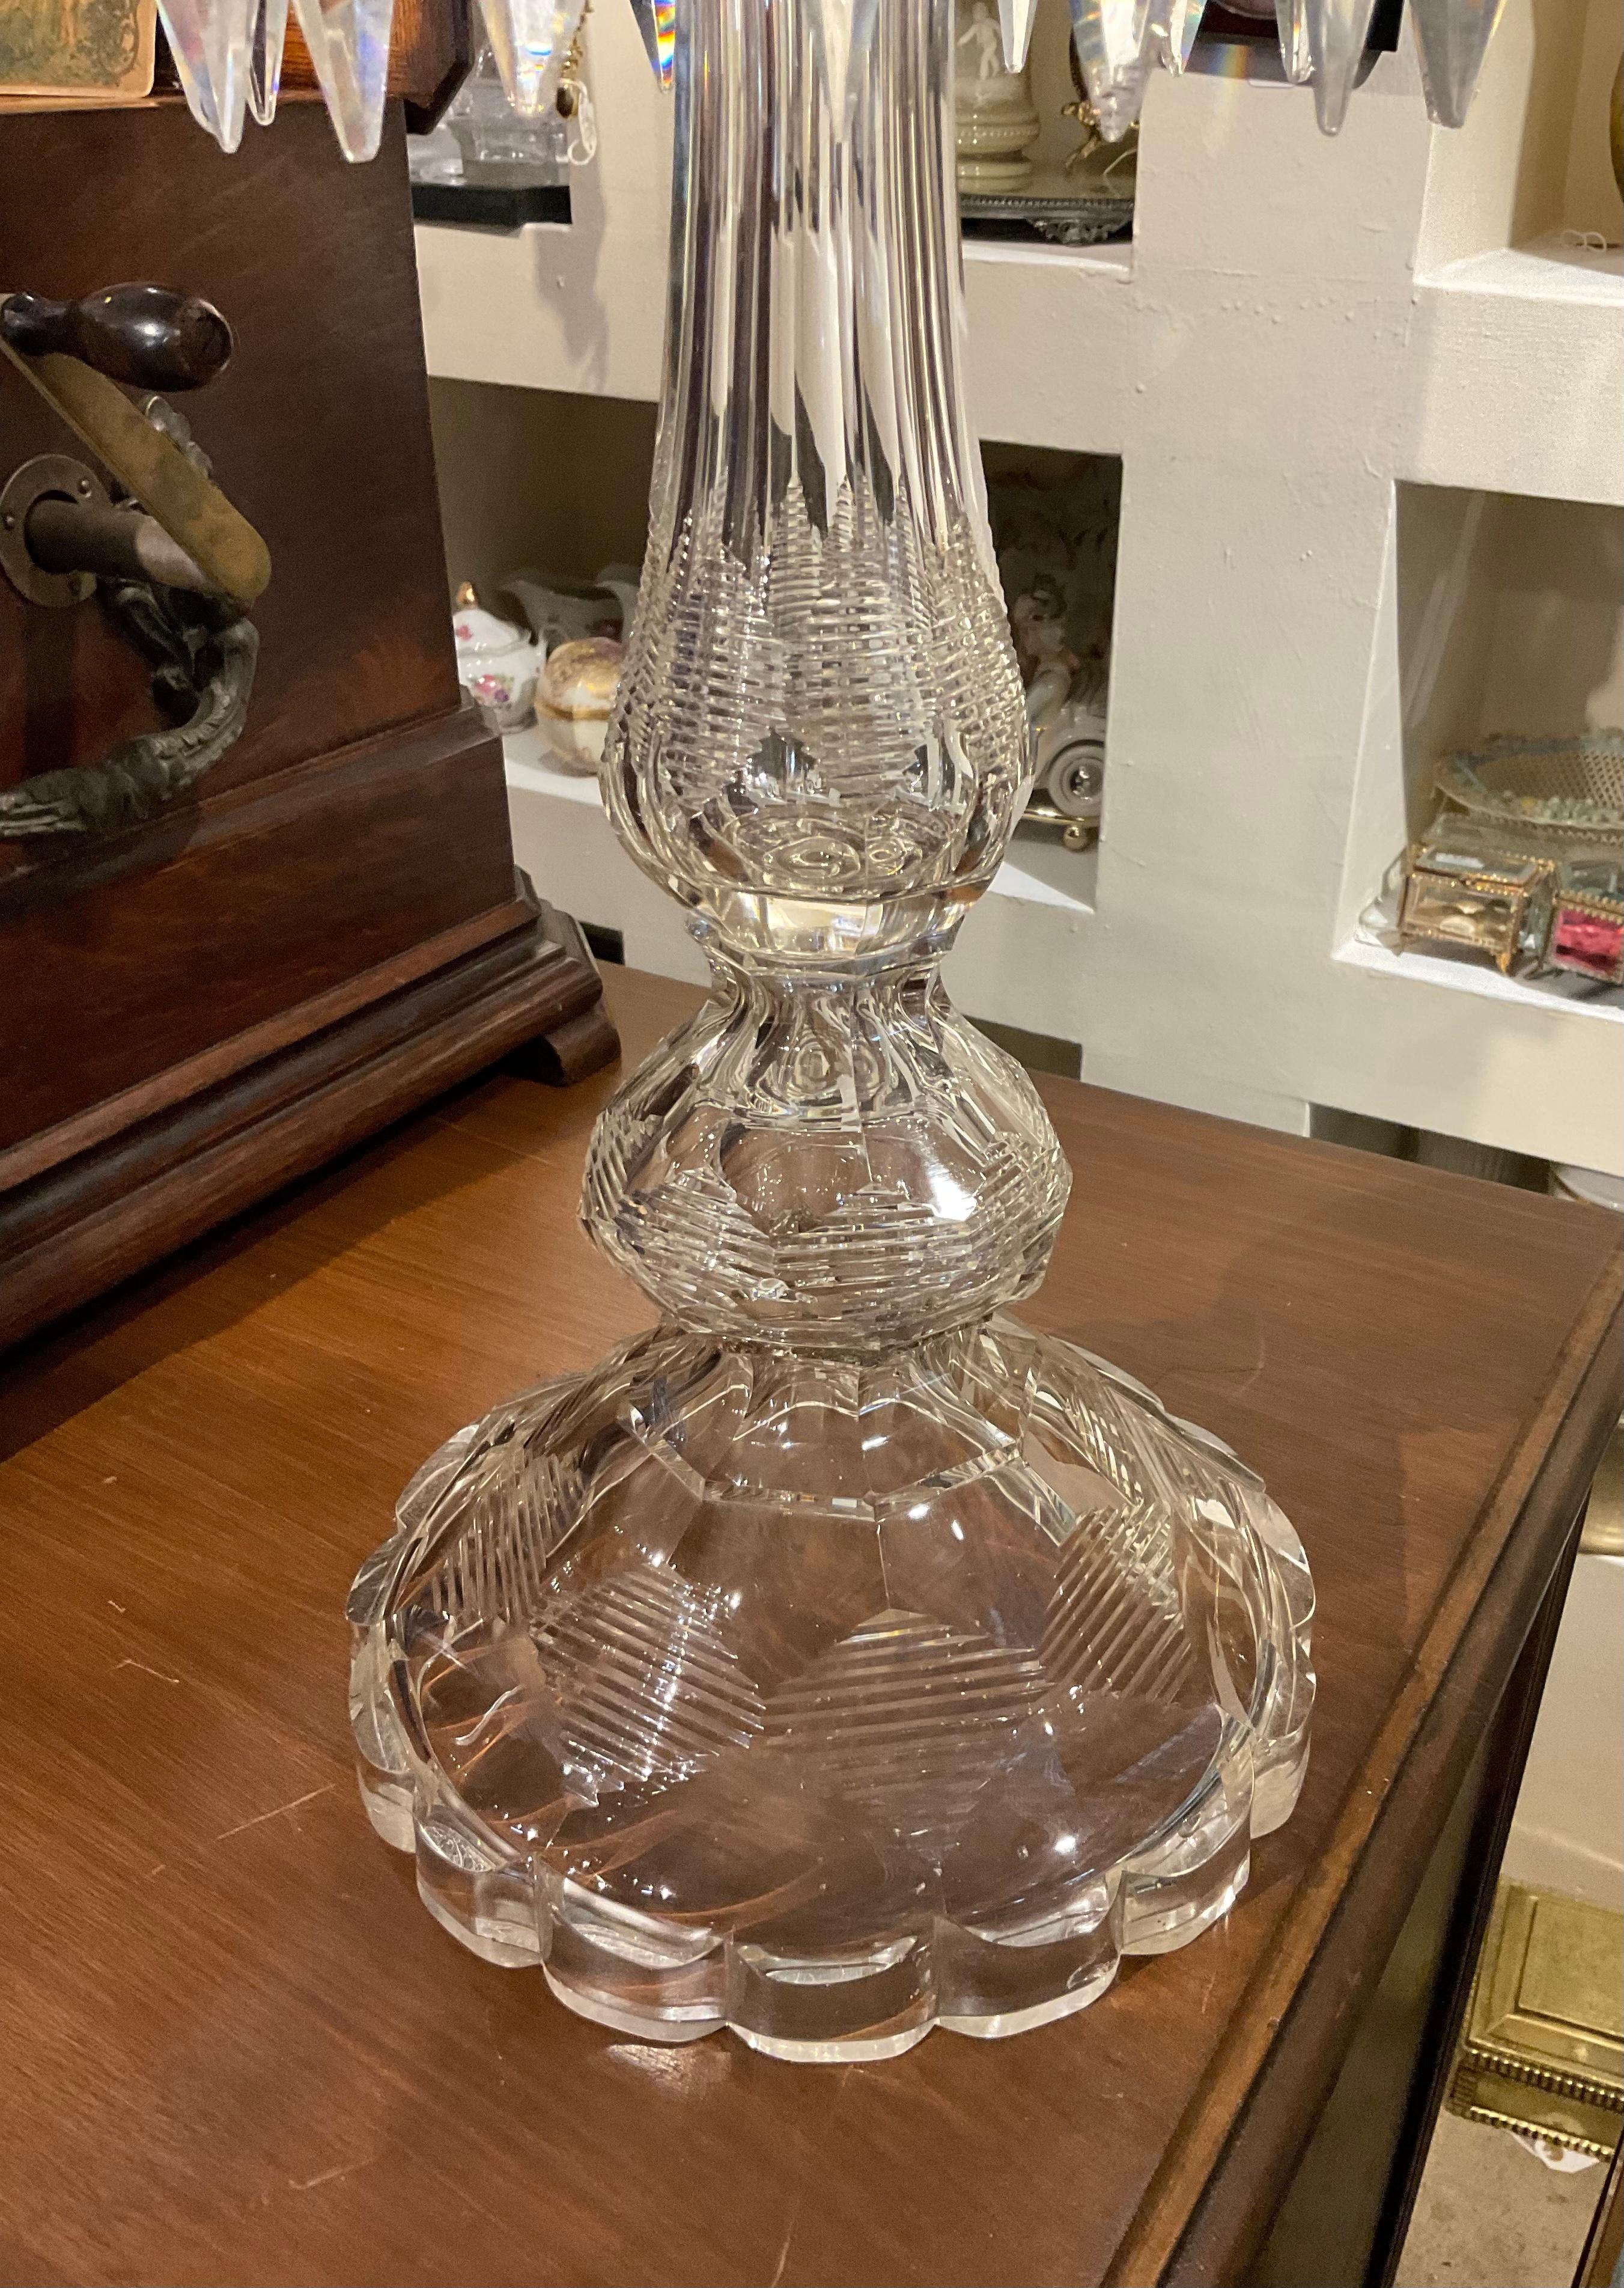 This is a Baccarat style high and large five arms crystal candelabra. It has five gold tone metal sconces with their white candles. It depicts a cut crystal high tulip shaped hurricane shades adorned with a bouquet of roses in the top and group of